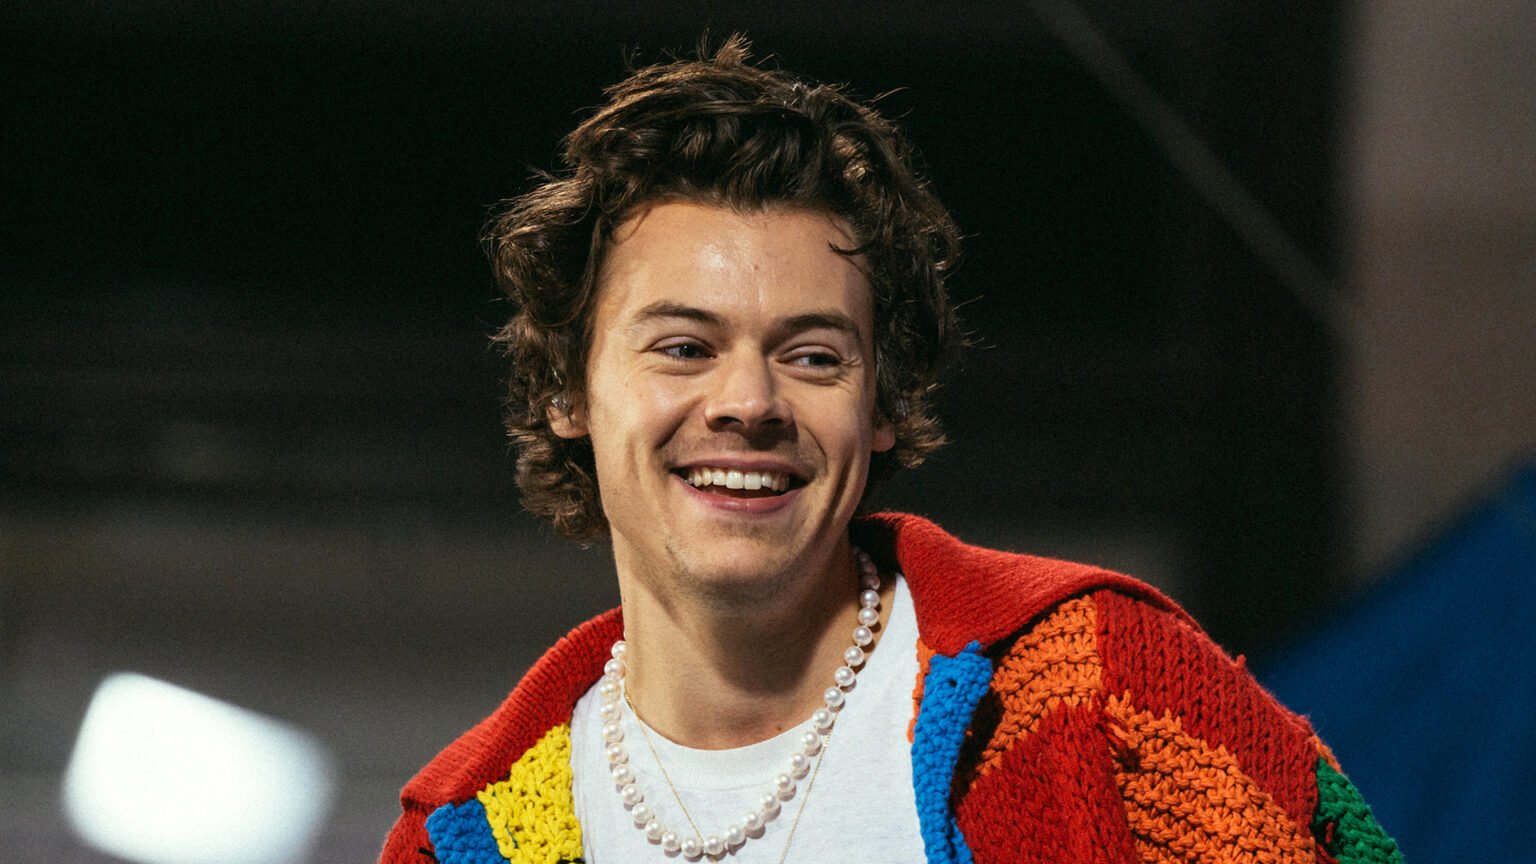 There has been speculation for years that the well-known British singer Harry Styles is gay. But what exactly is behind this rumor?